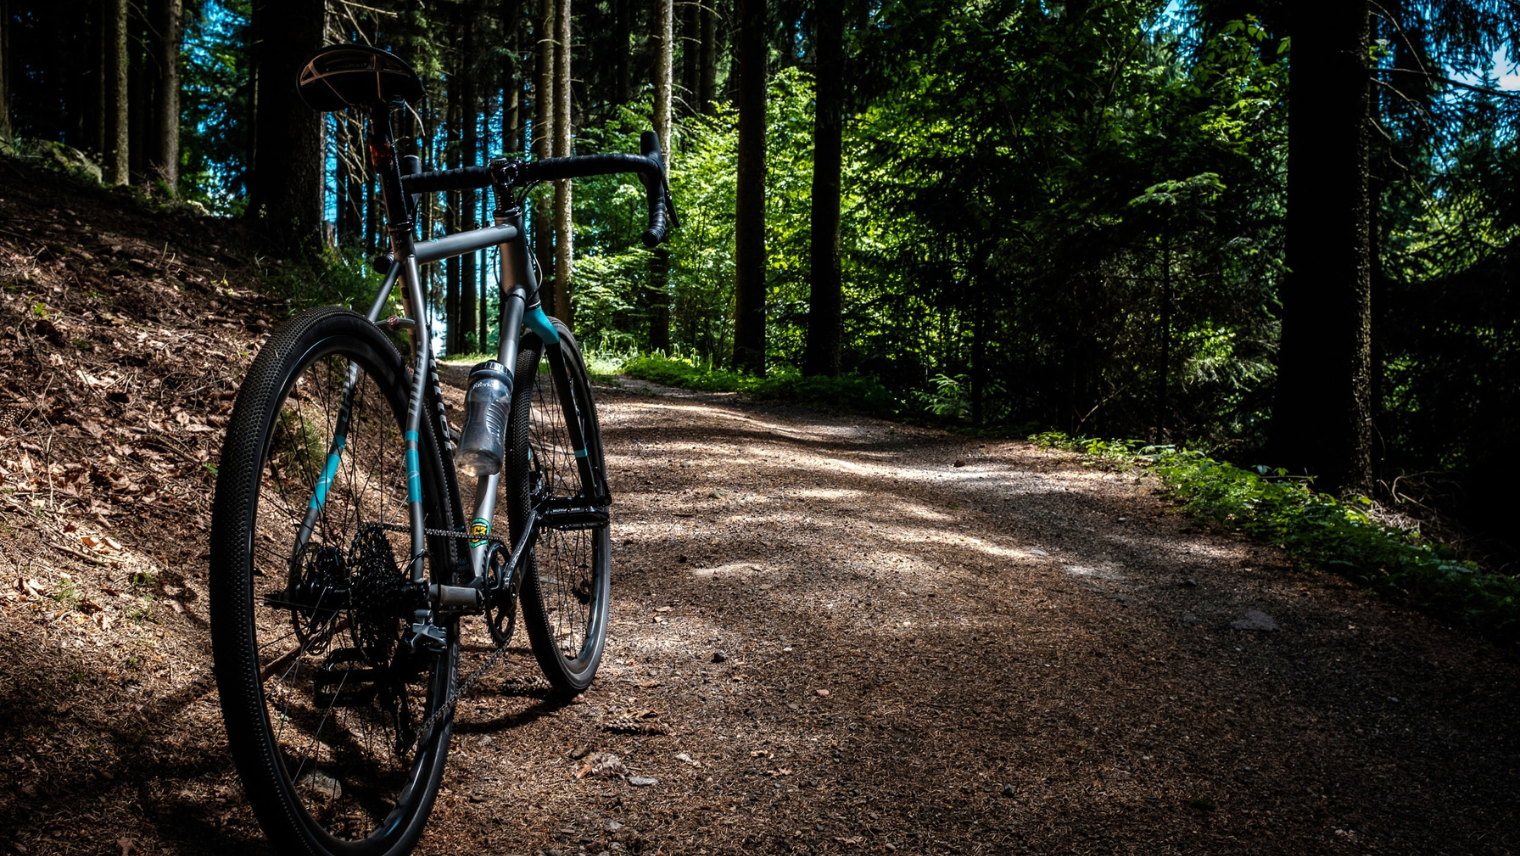 A bike in the forest